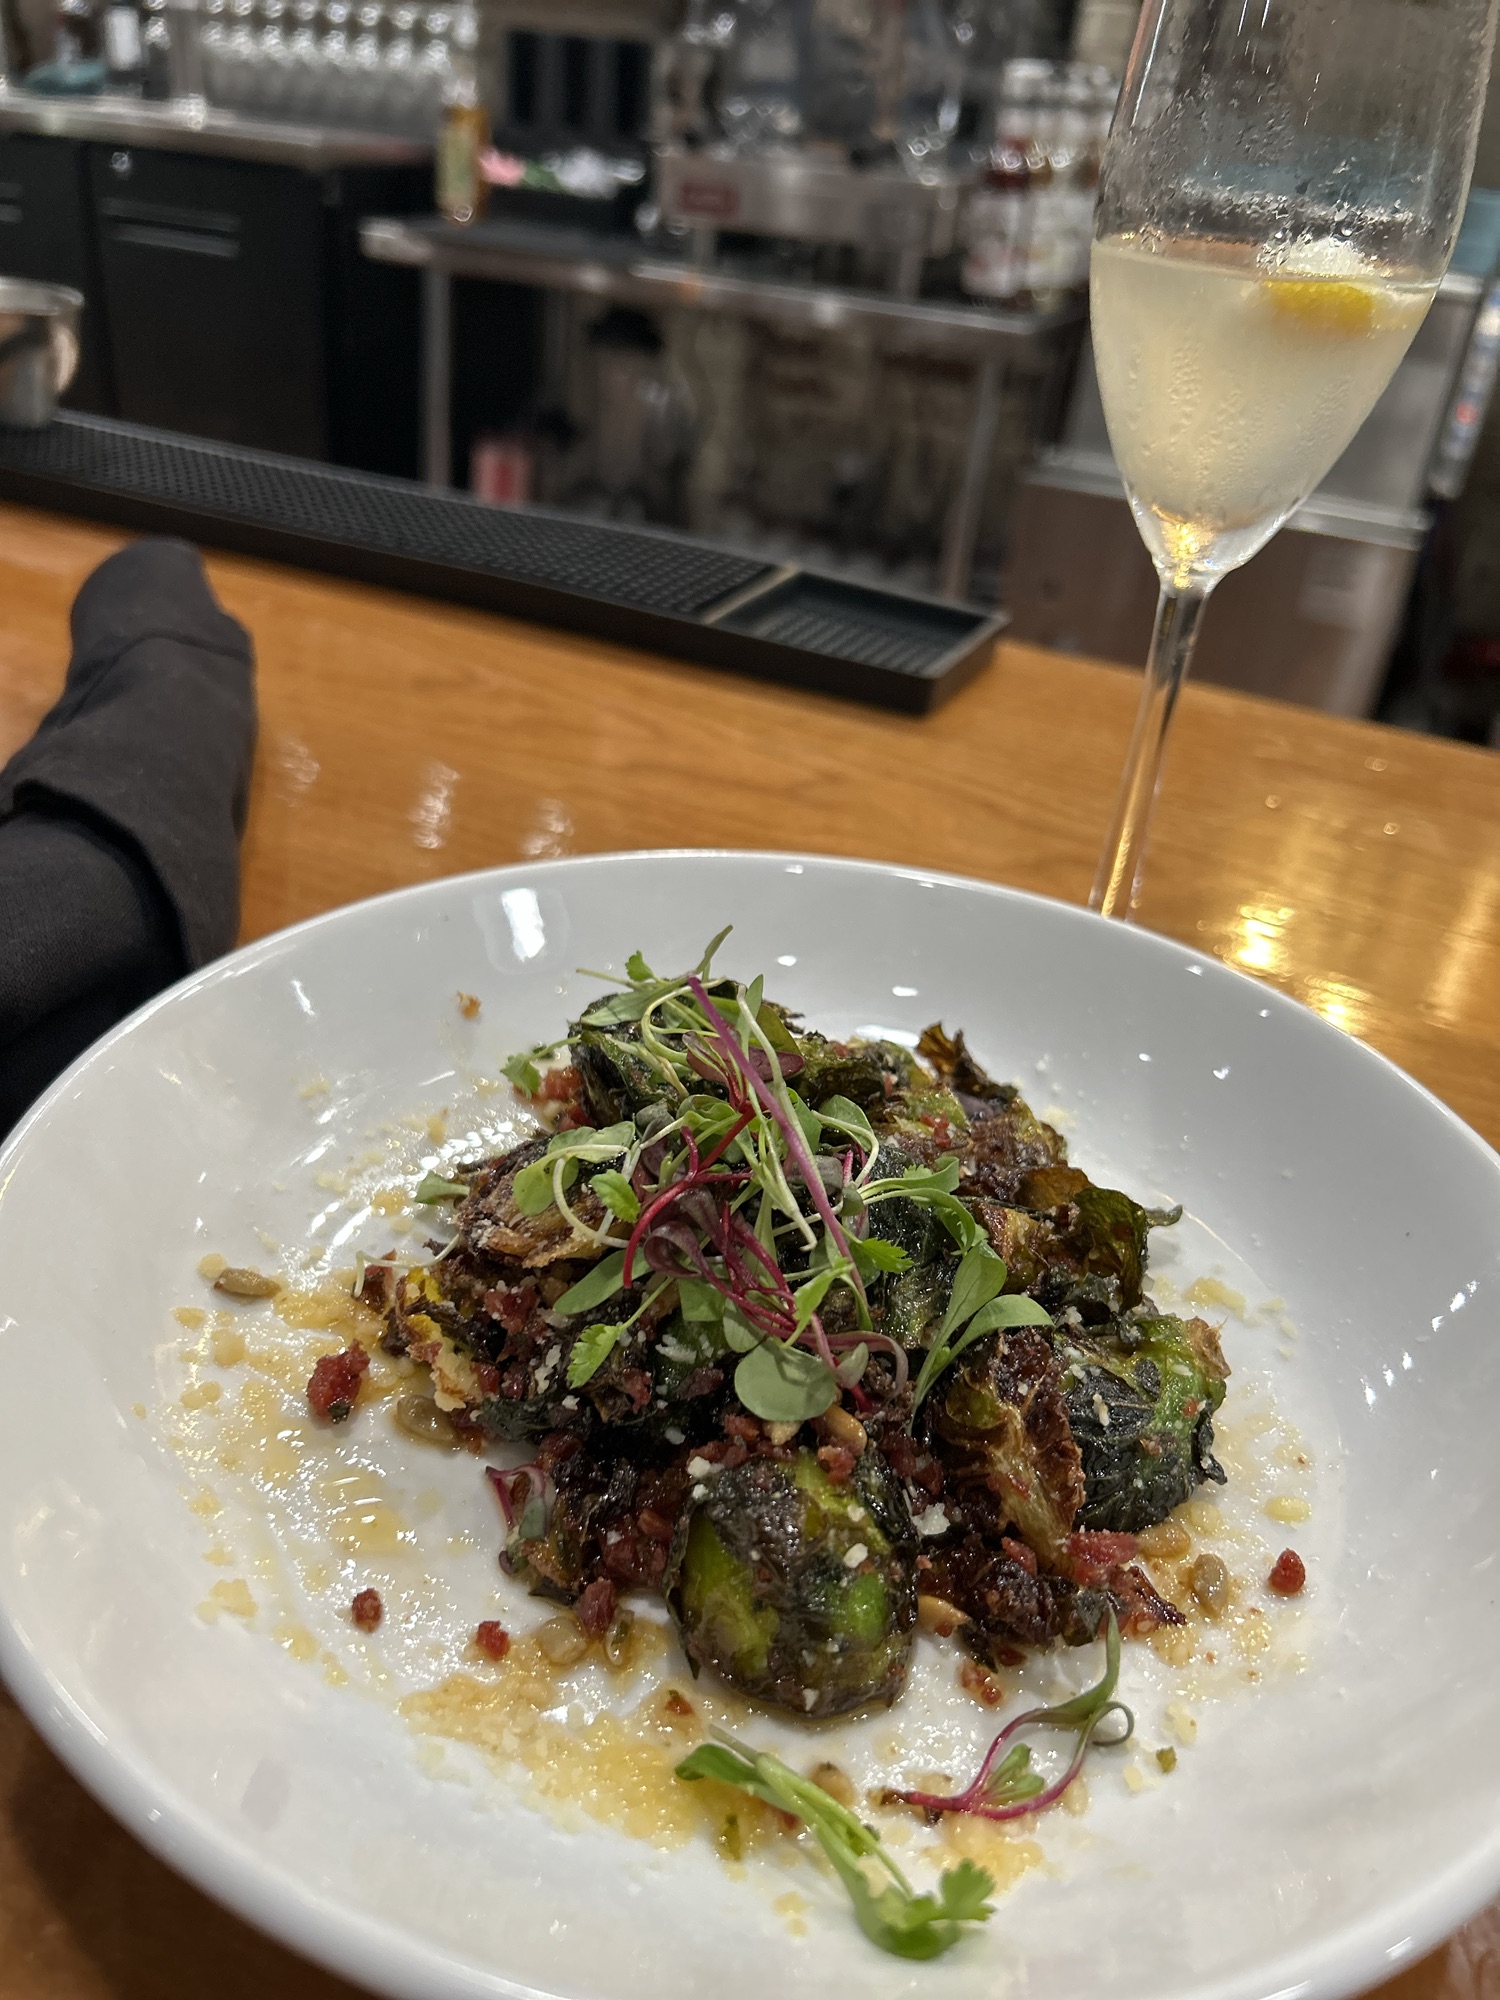 Carmelized Brussels Sprouts at Hayne Street Gastrolounge Bar and Restaurant in Monroe, NC.